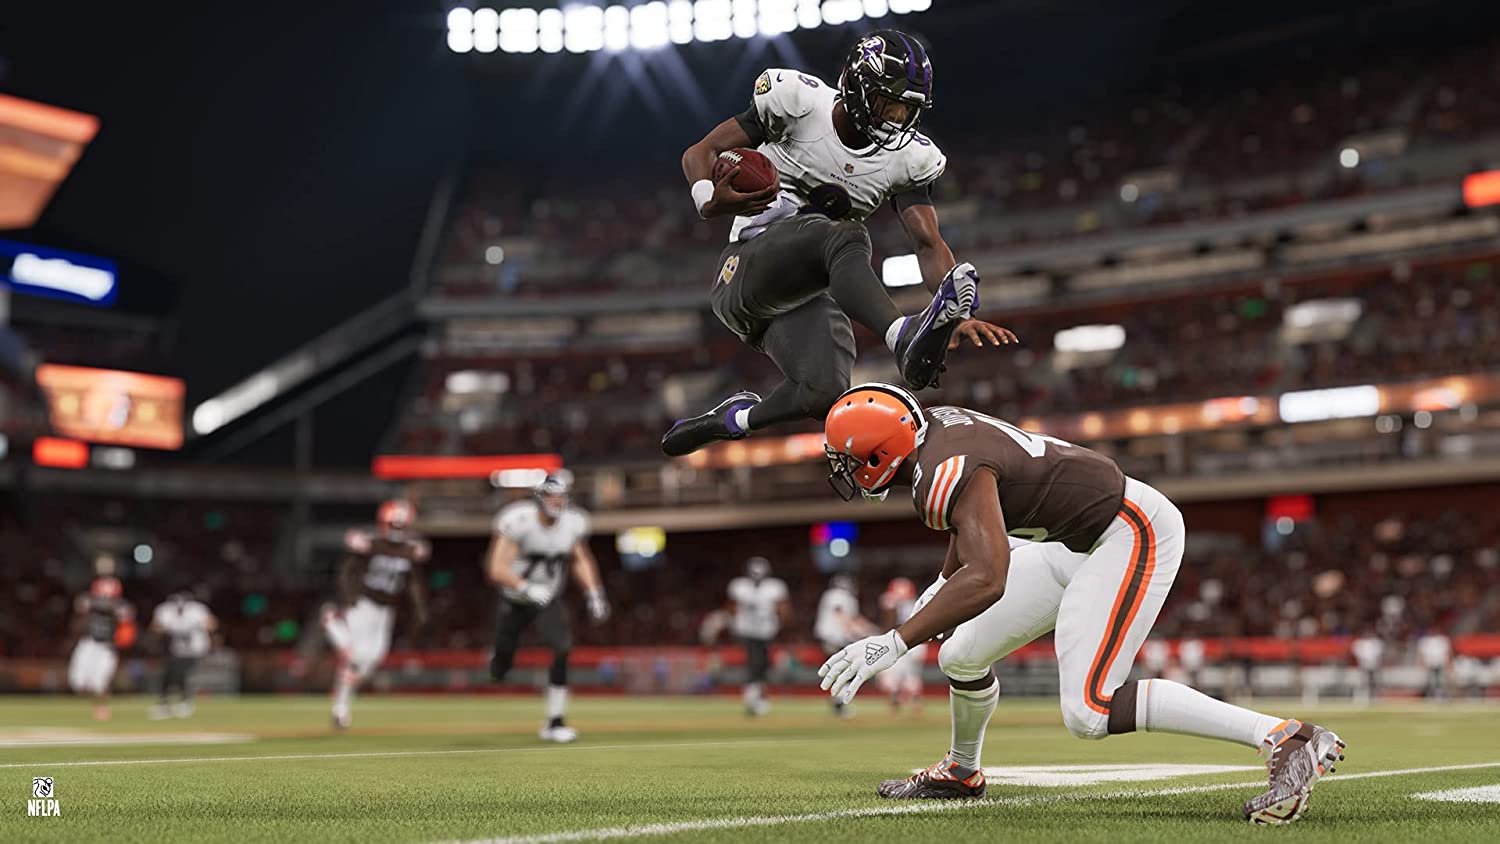 Juego XBOX One/Series X - Madden 22